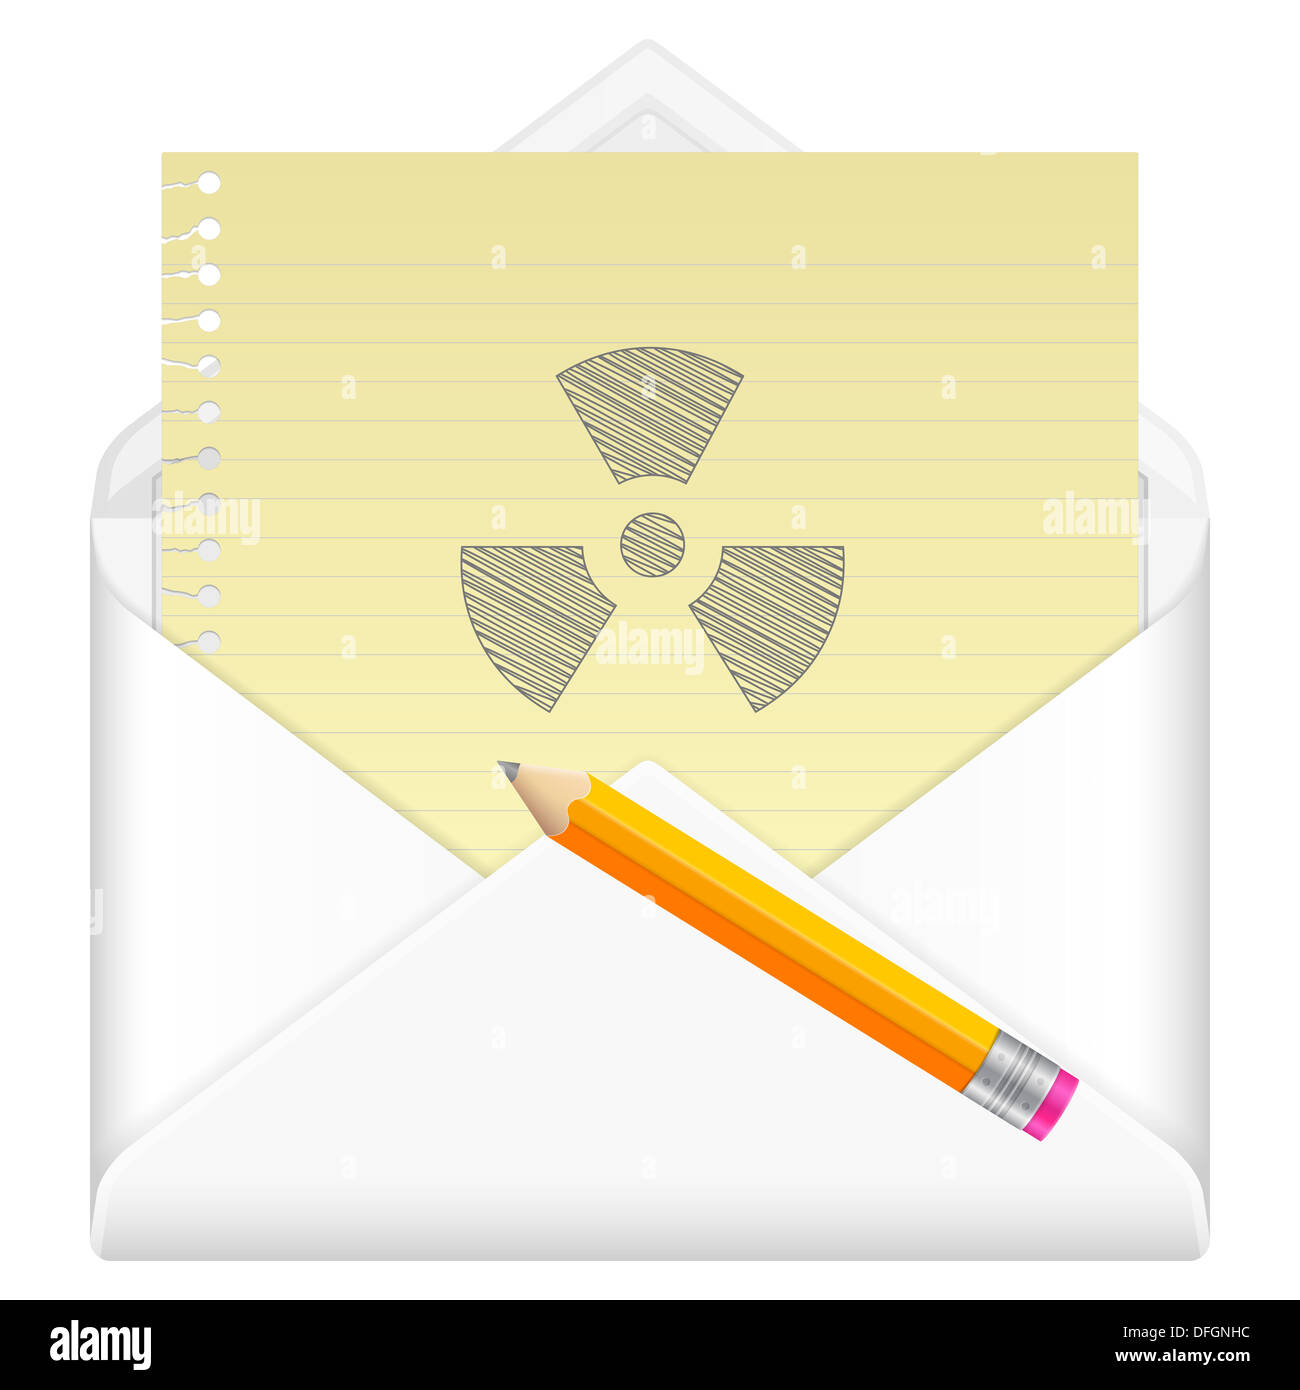 Envelope, notebook sheet, pencil and symbol on a white background. Stock Photo